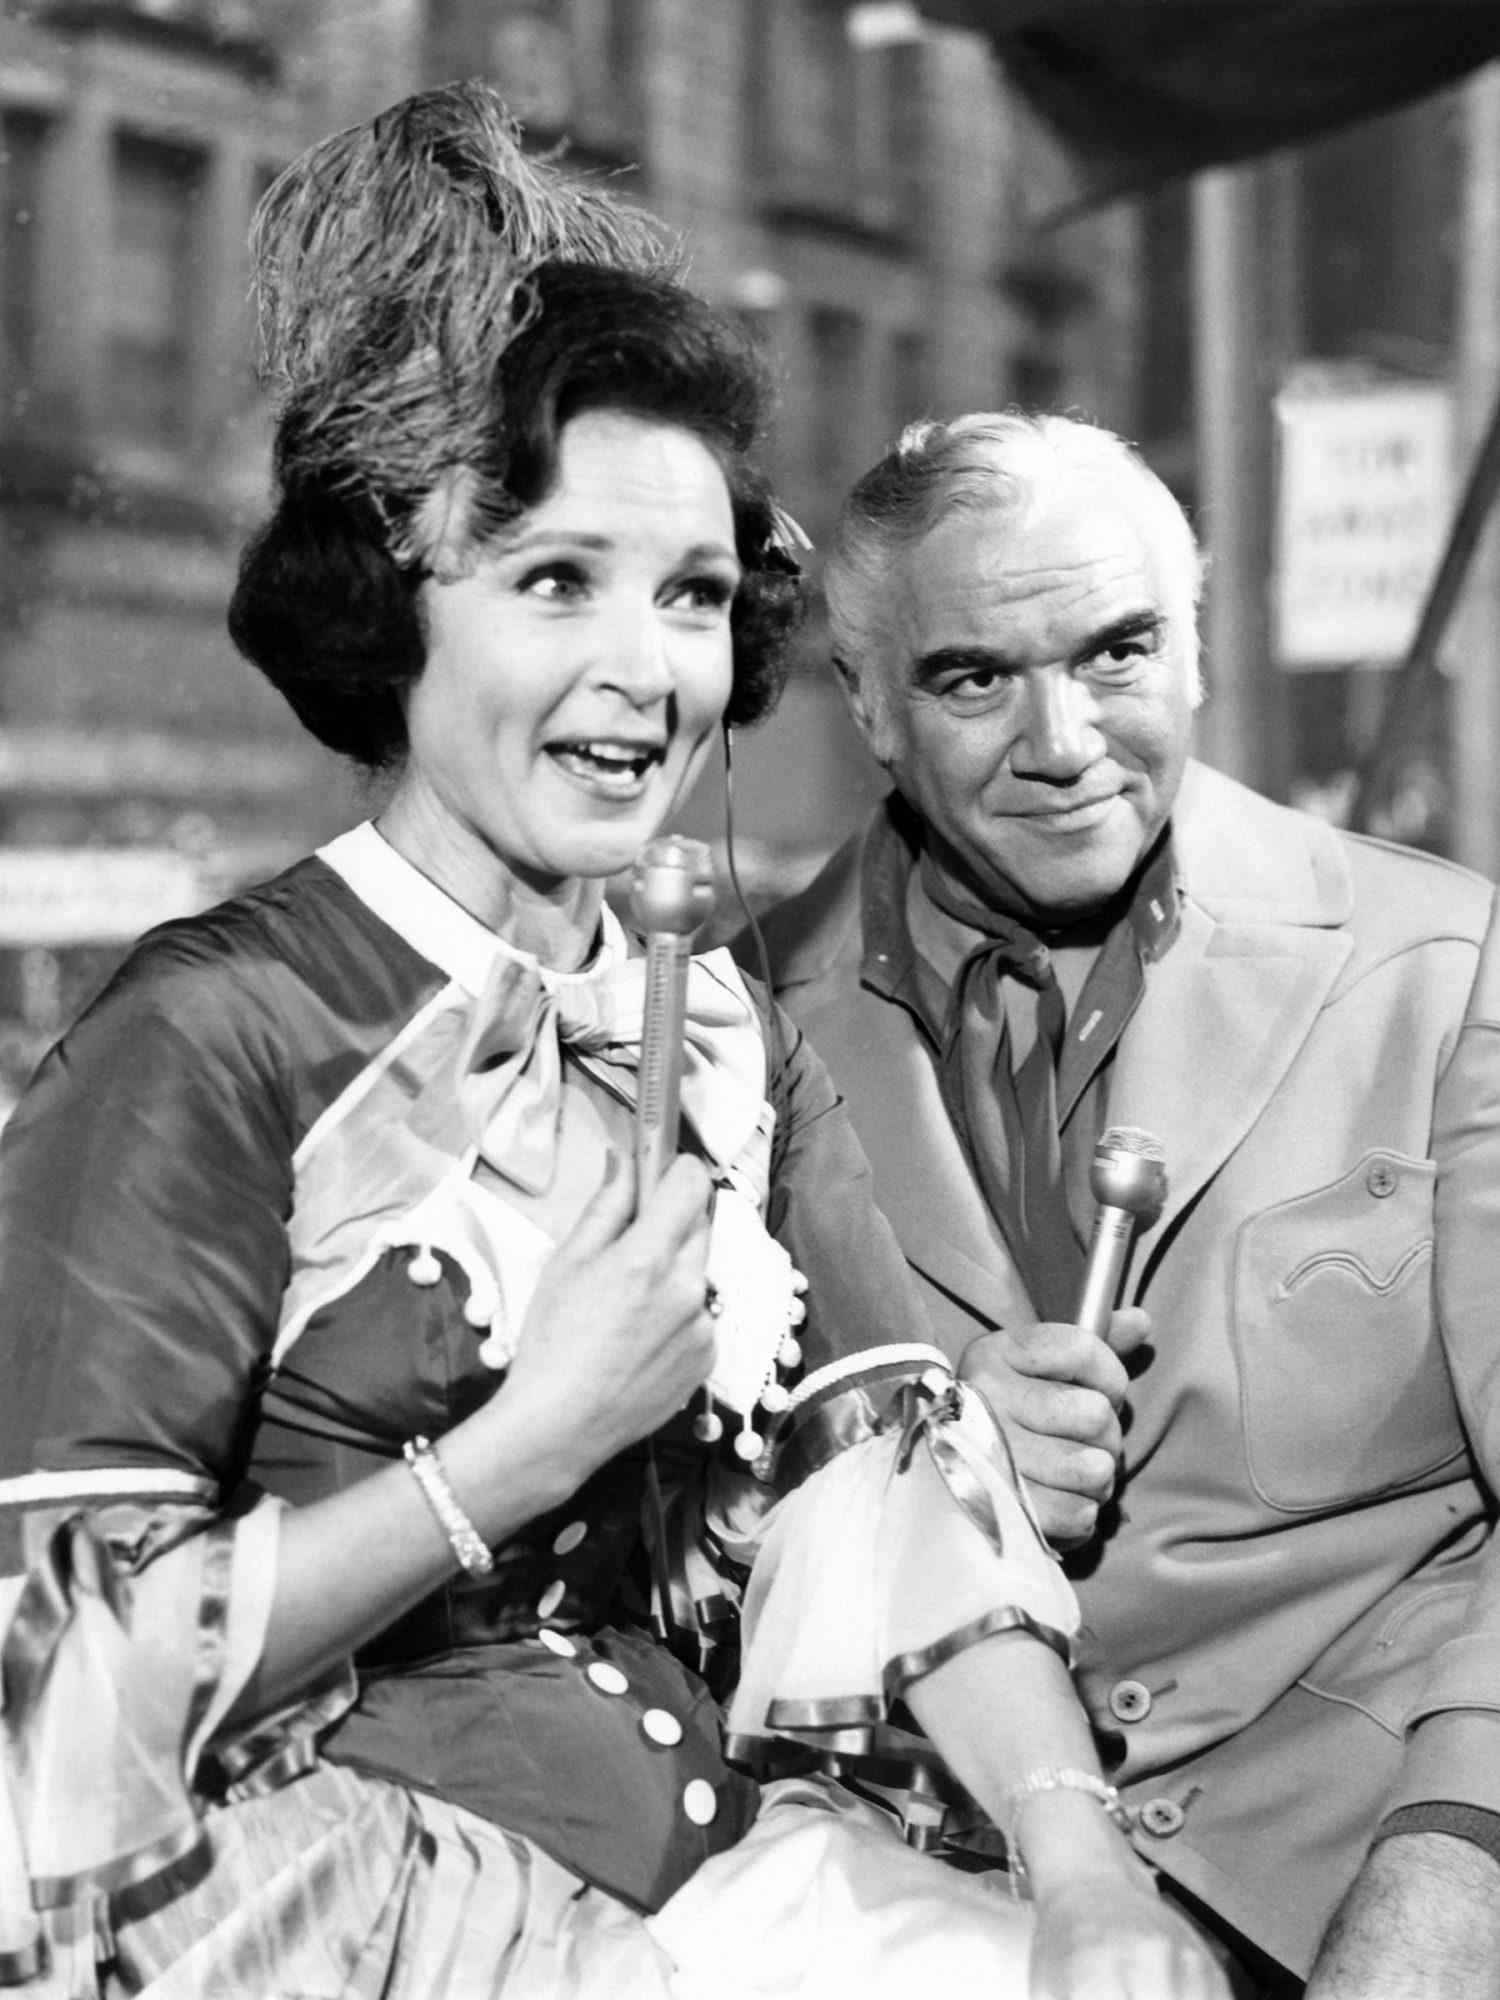 Betty White with Lorne Greene at the Macy's Thanksgiving Day Parade in 1967